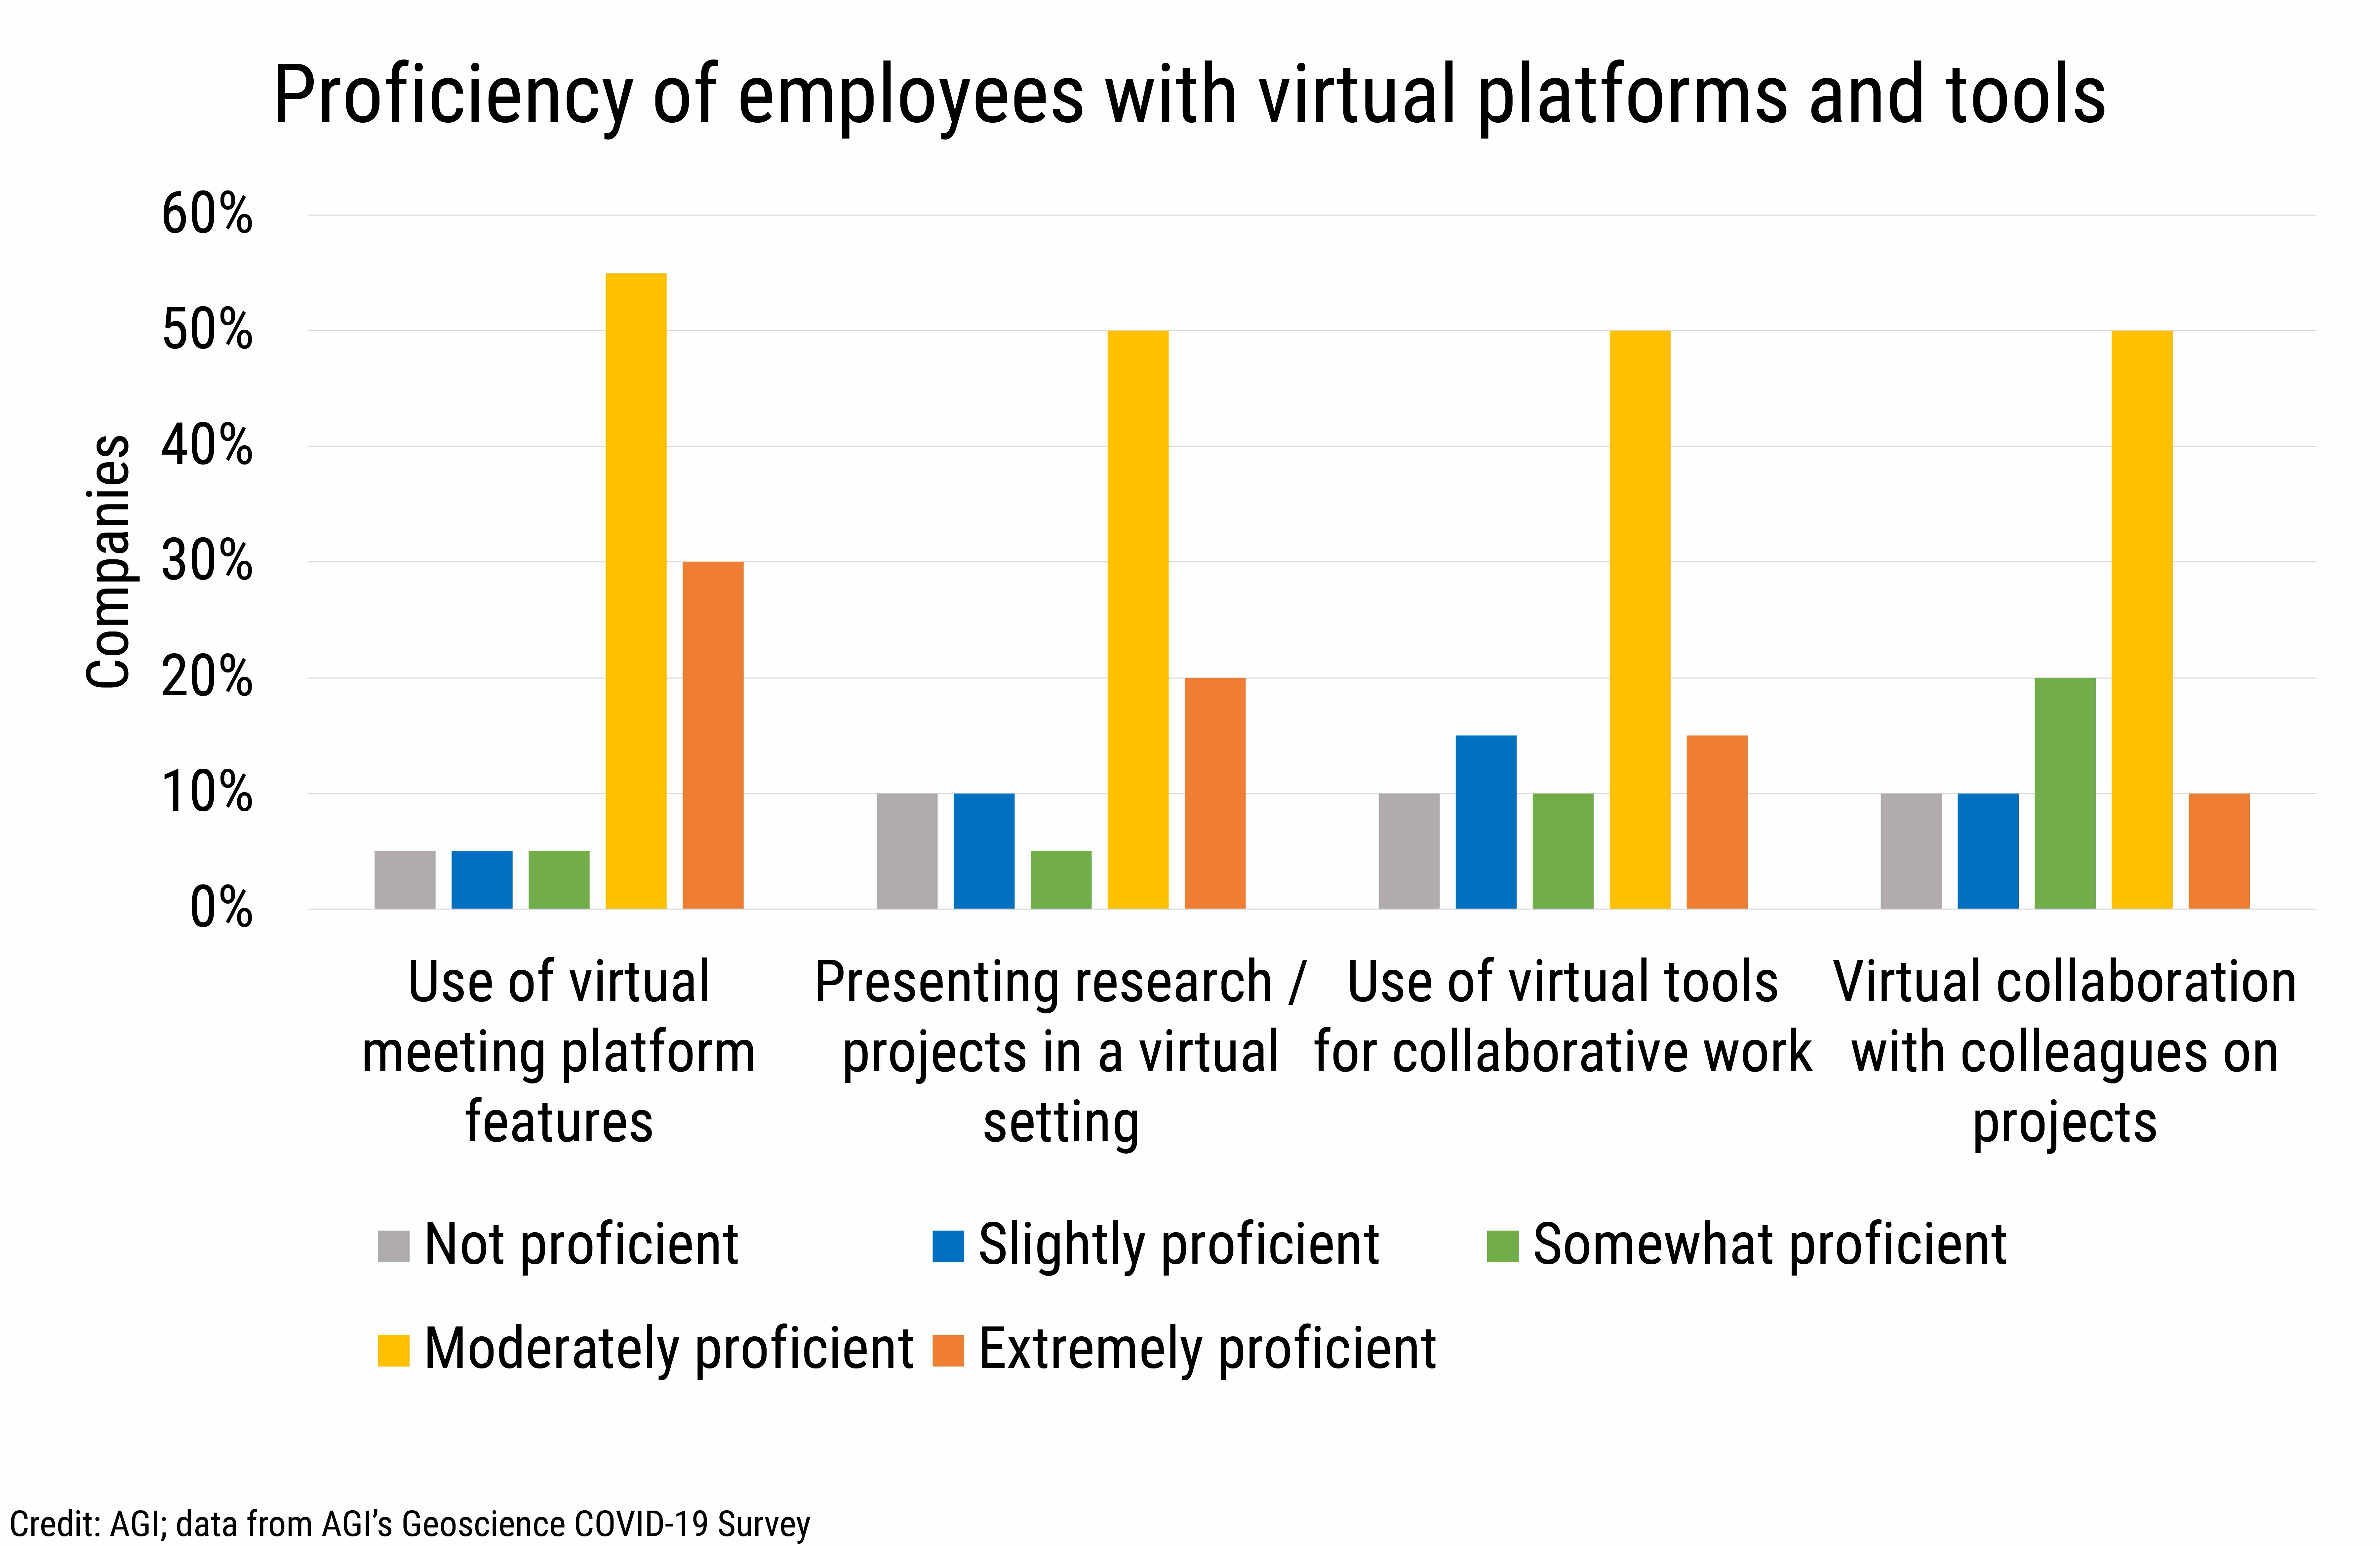 DB_2021-005_chart09: Proficiency of employees with virtual platforms and tools (Credit: AGI; data from AGI's Geoscience COVID-19 Survey)